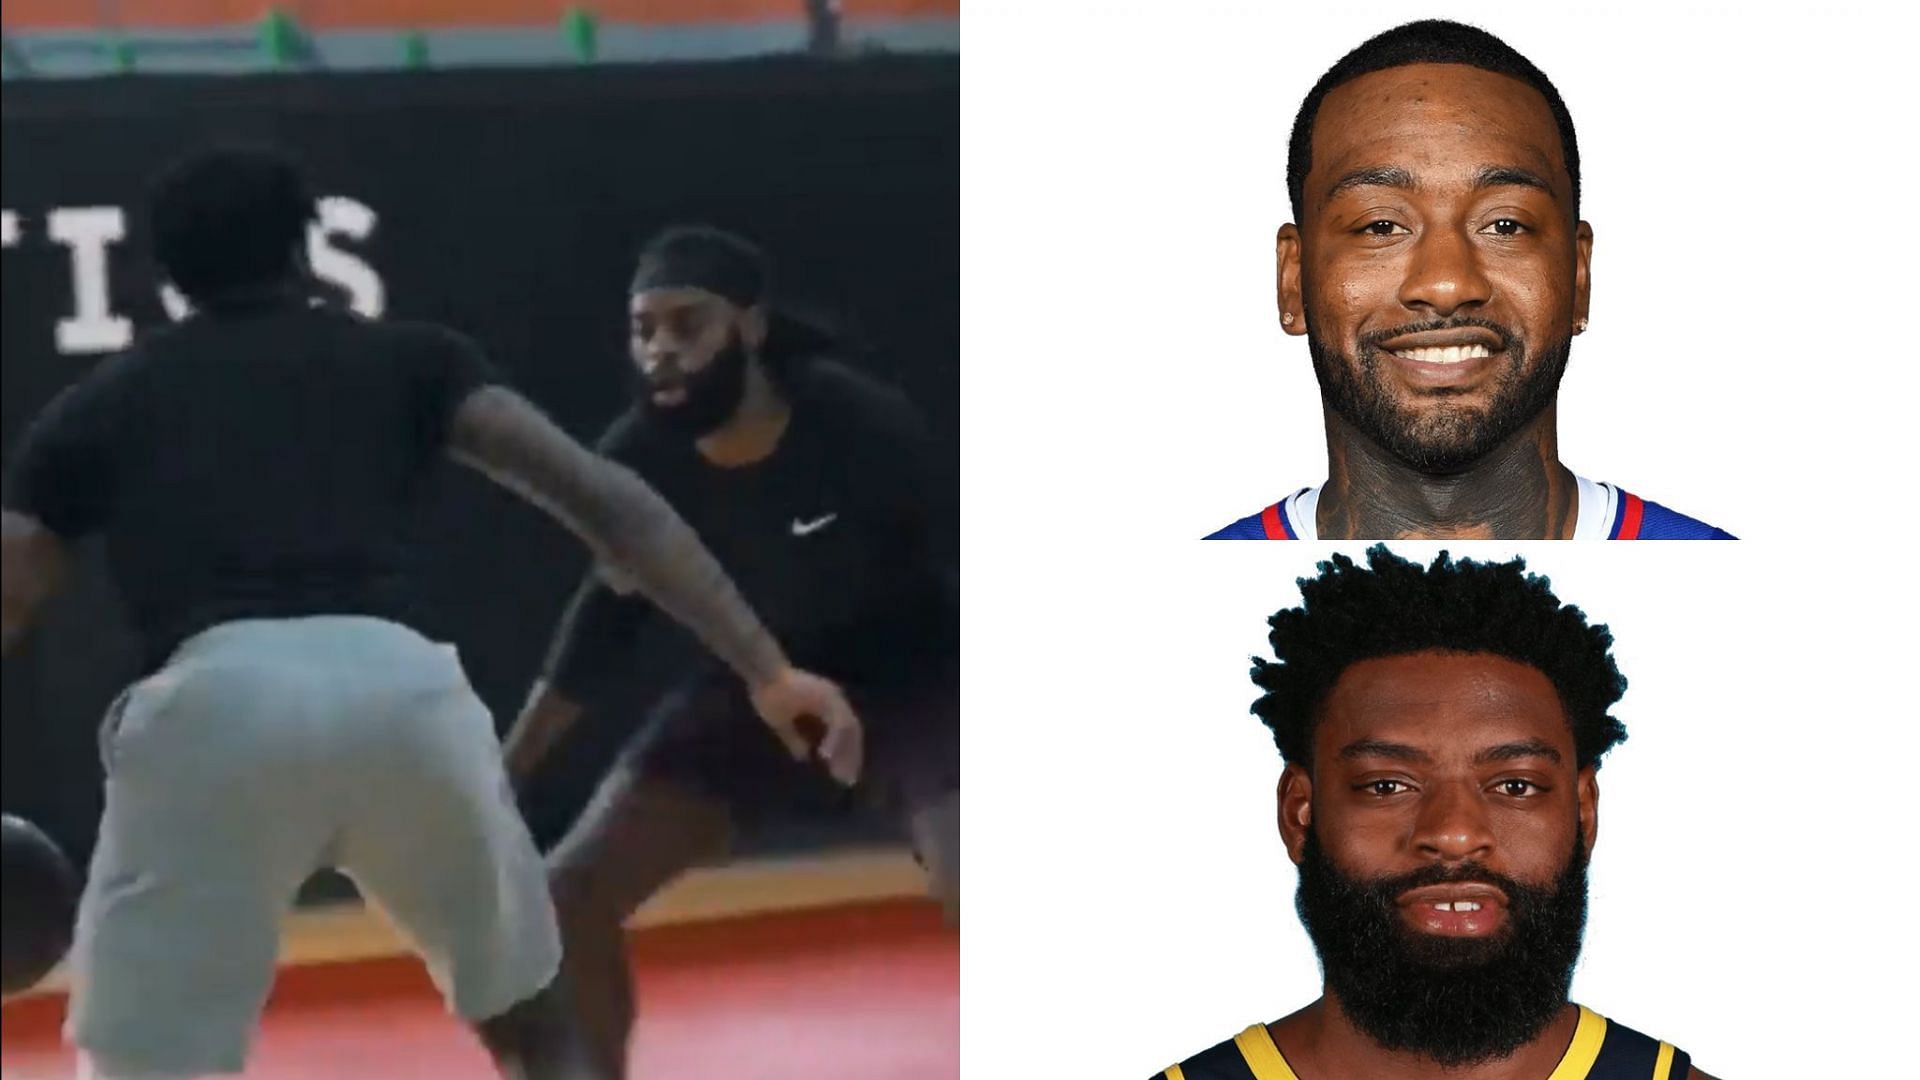 John Wall and Tyreke Evans chirp at each other while swapping buckets in open gym matchup